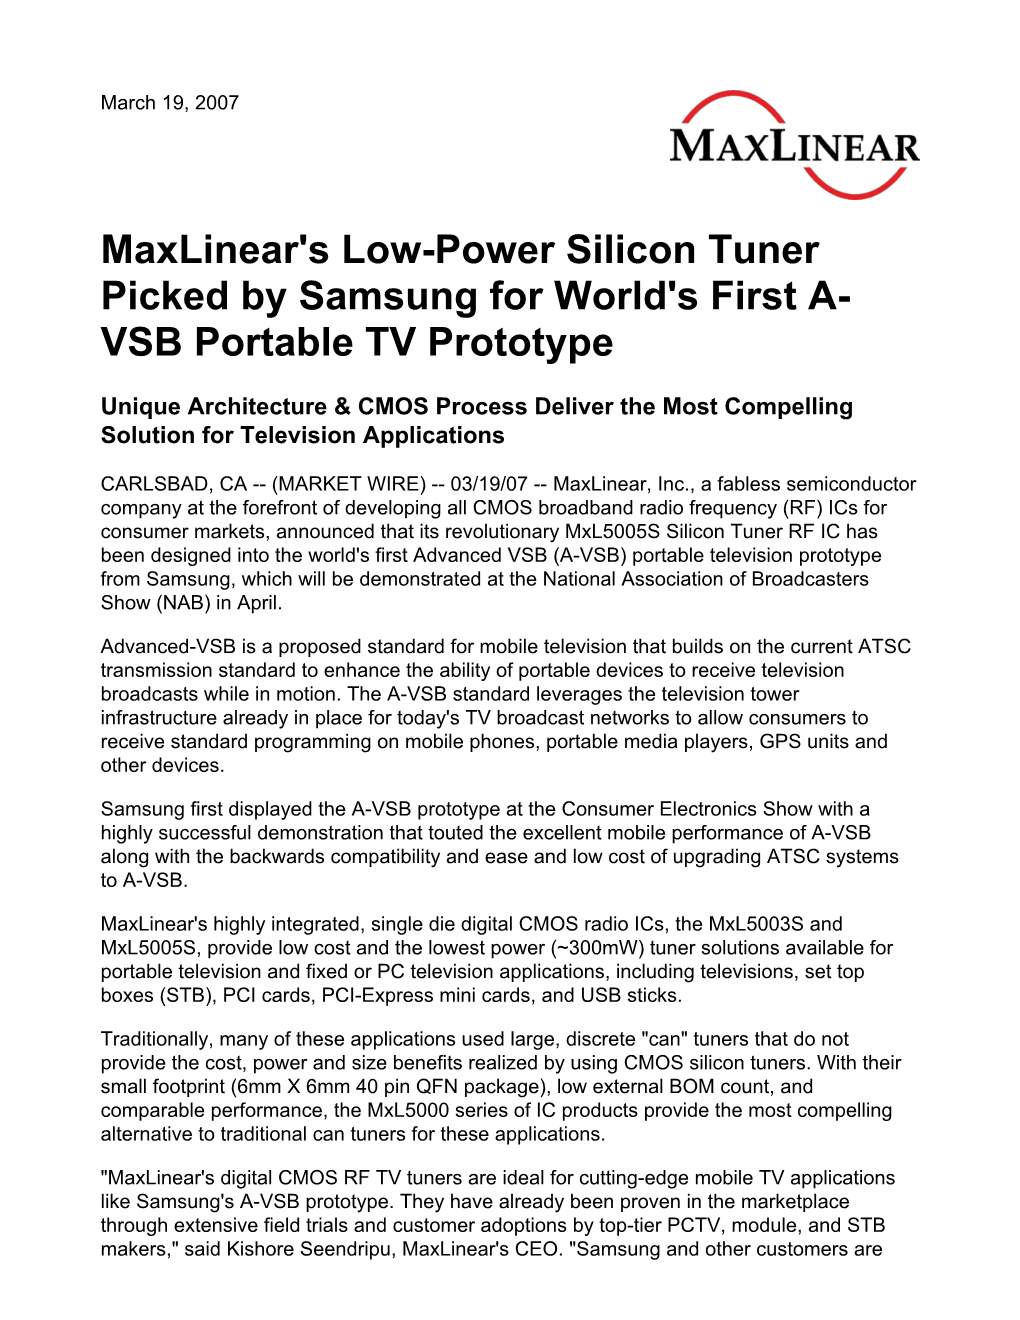 Maxlinear's Low-Power Silicon Tuner Picked by Samsung for World's First A- VSB Portable TV Prototype